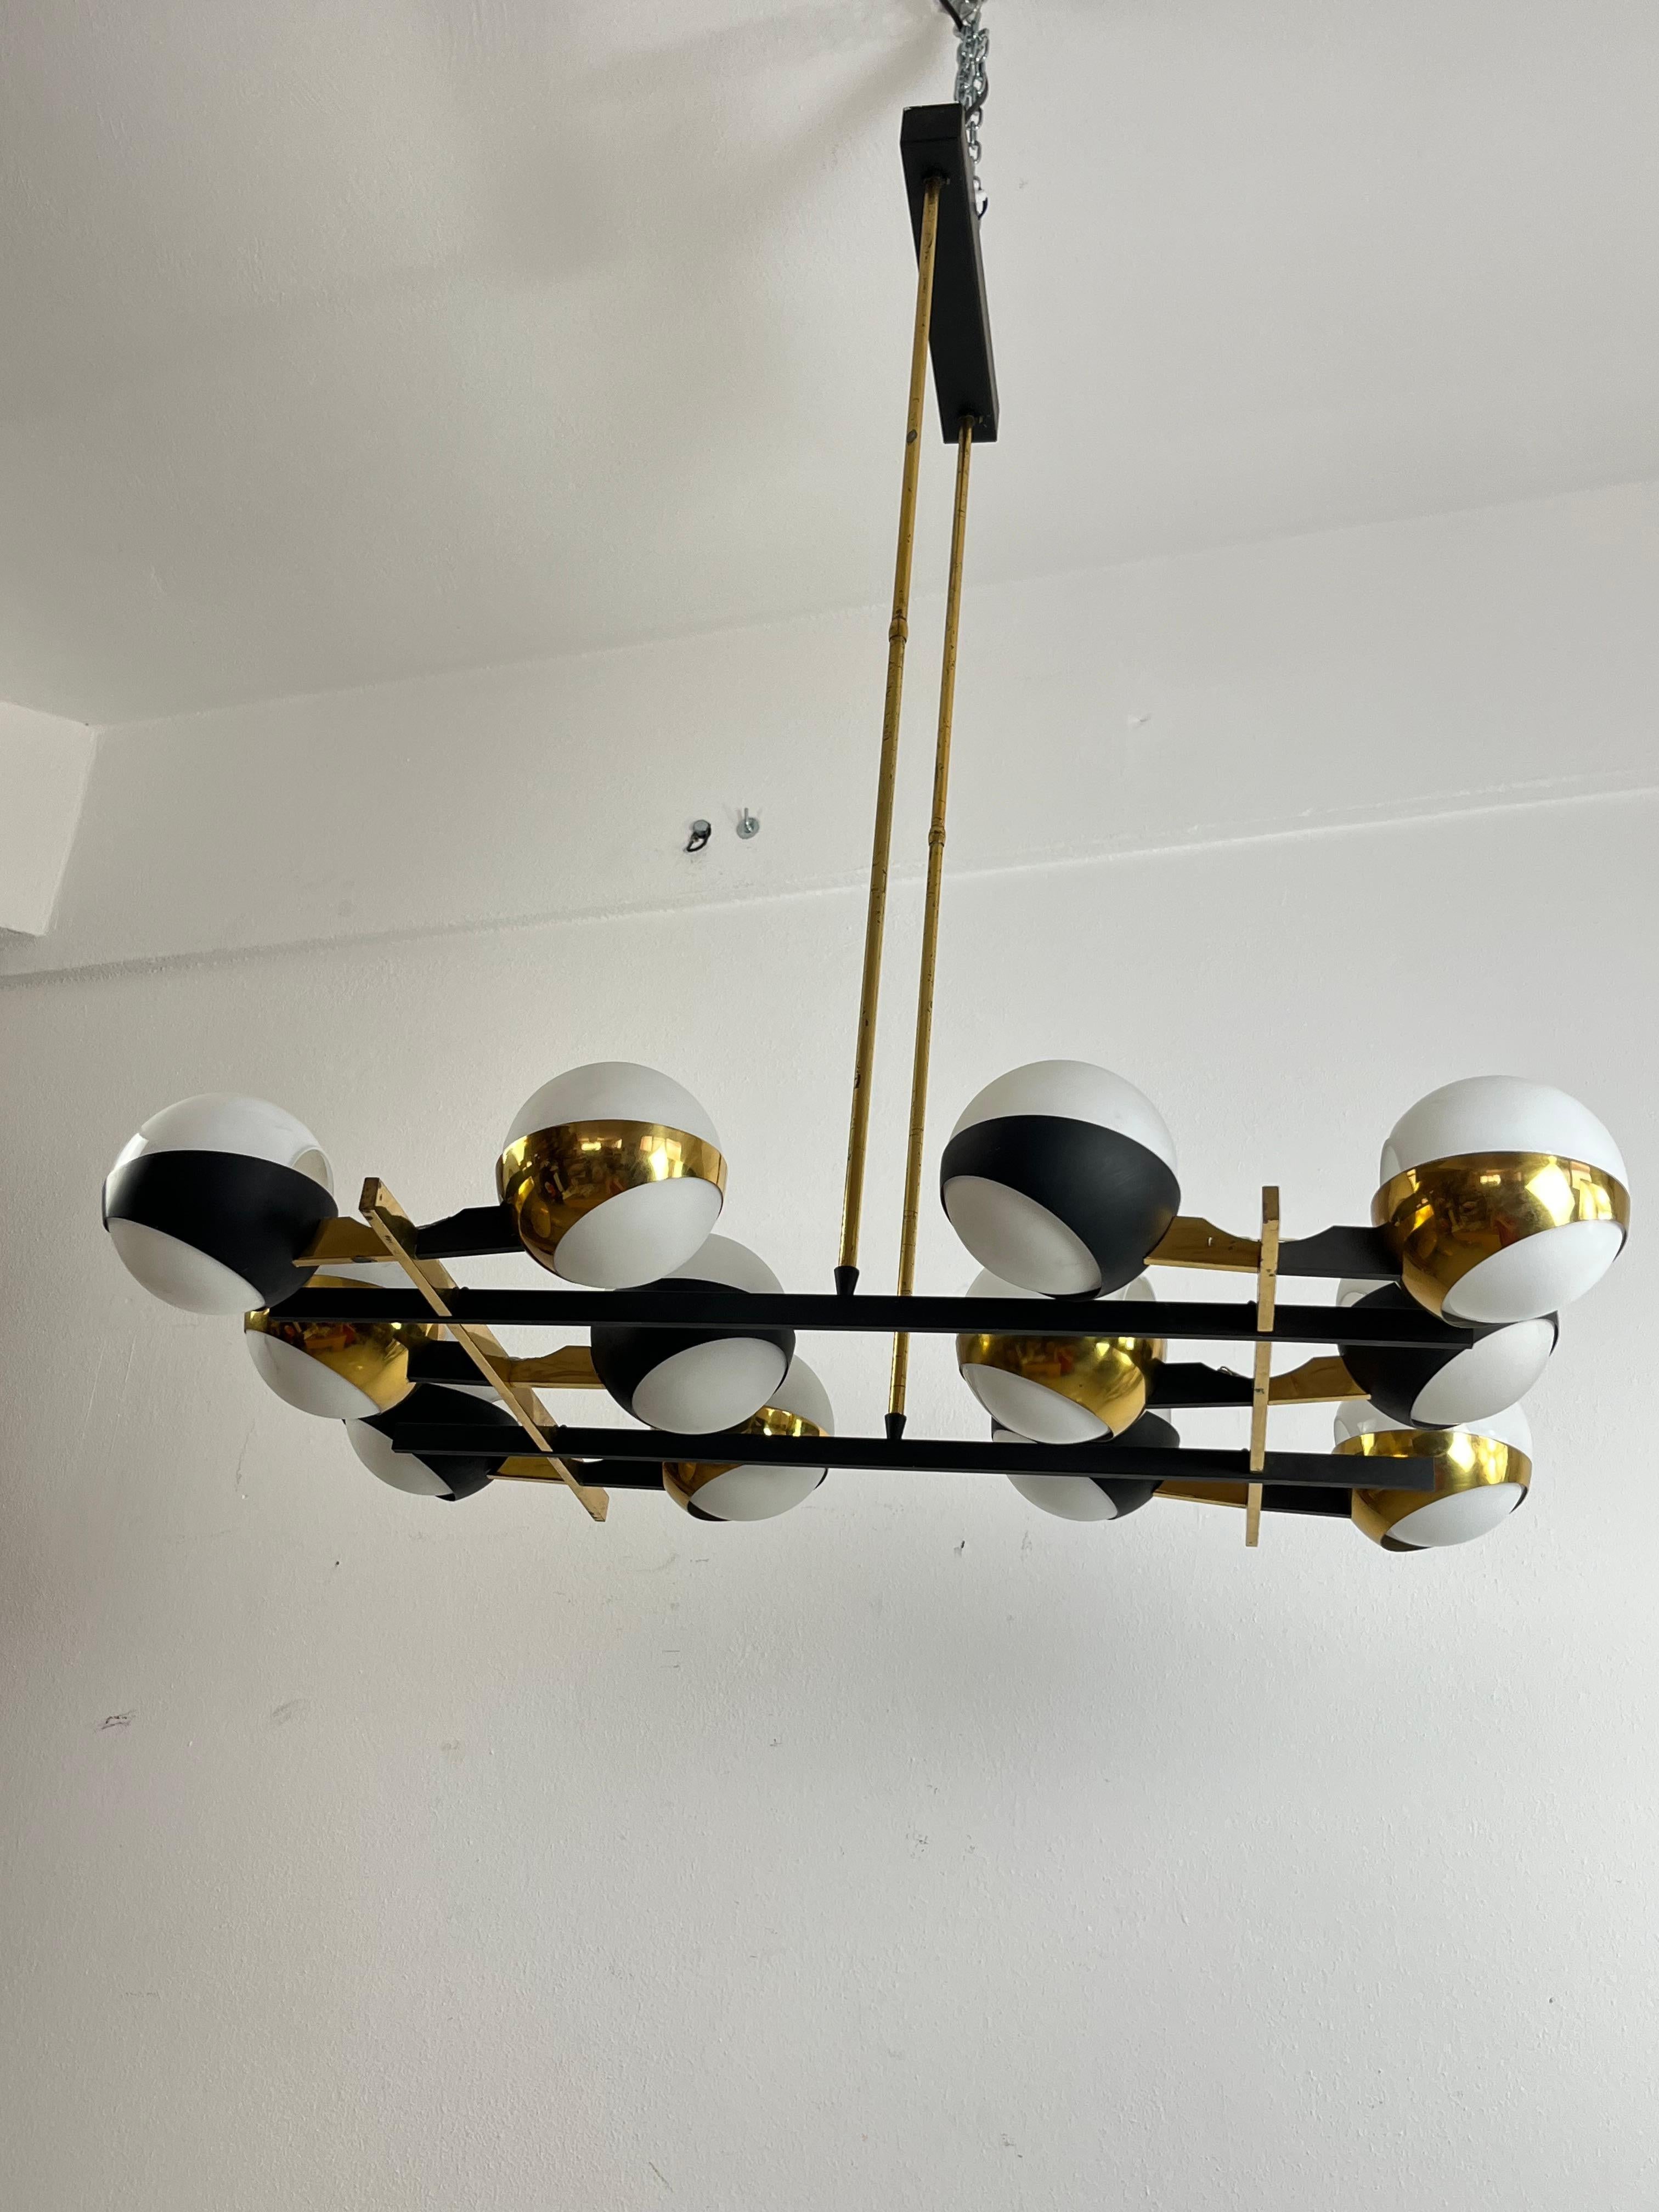 12-Globe Glass & Brass Mid-Century Stilnovo Chandelier Italian design 1950s.
The spheres are intact and in opaline glass. The brass structure has black enamelled aluminum parts. Good condition, small signs of aging. E14 lamps.